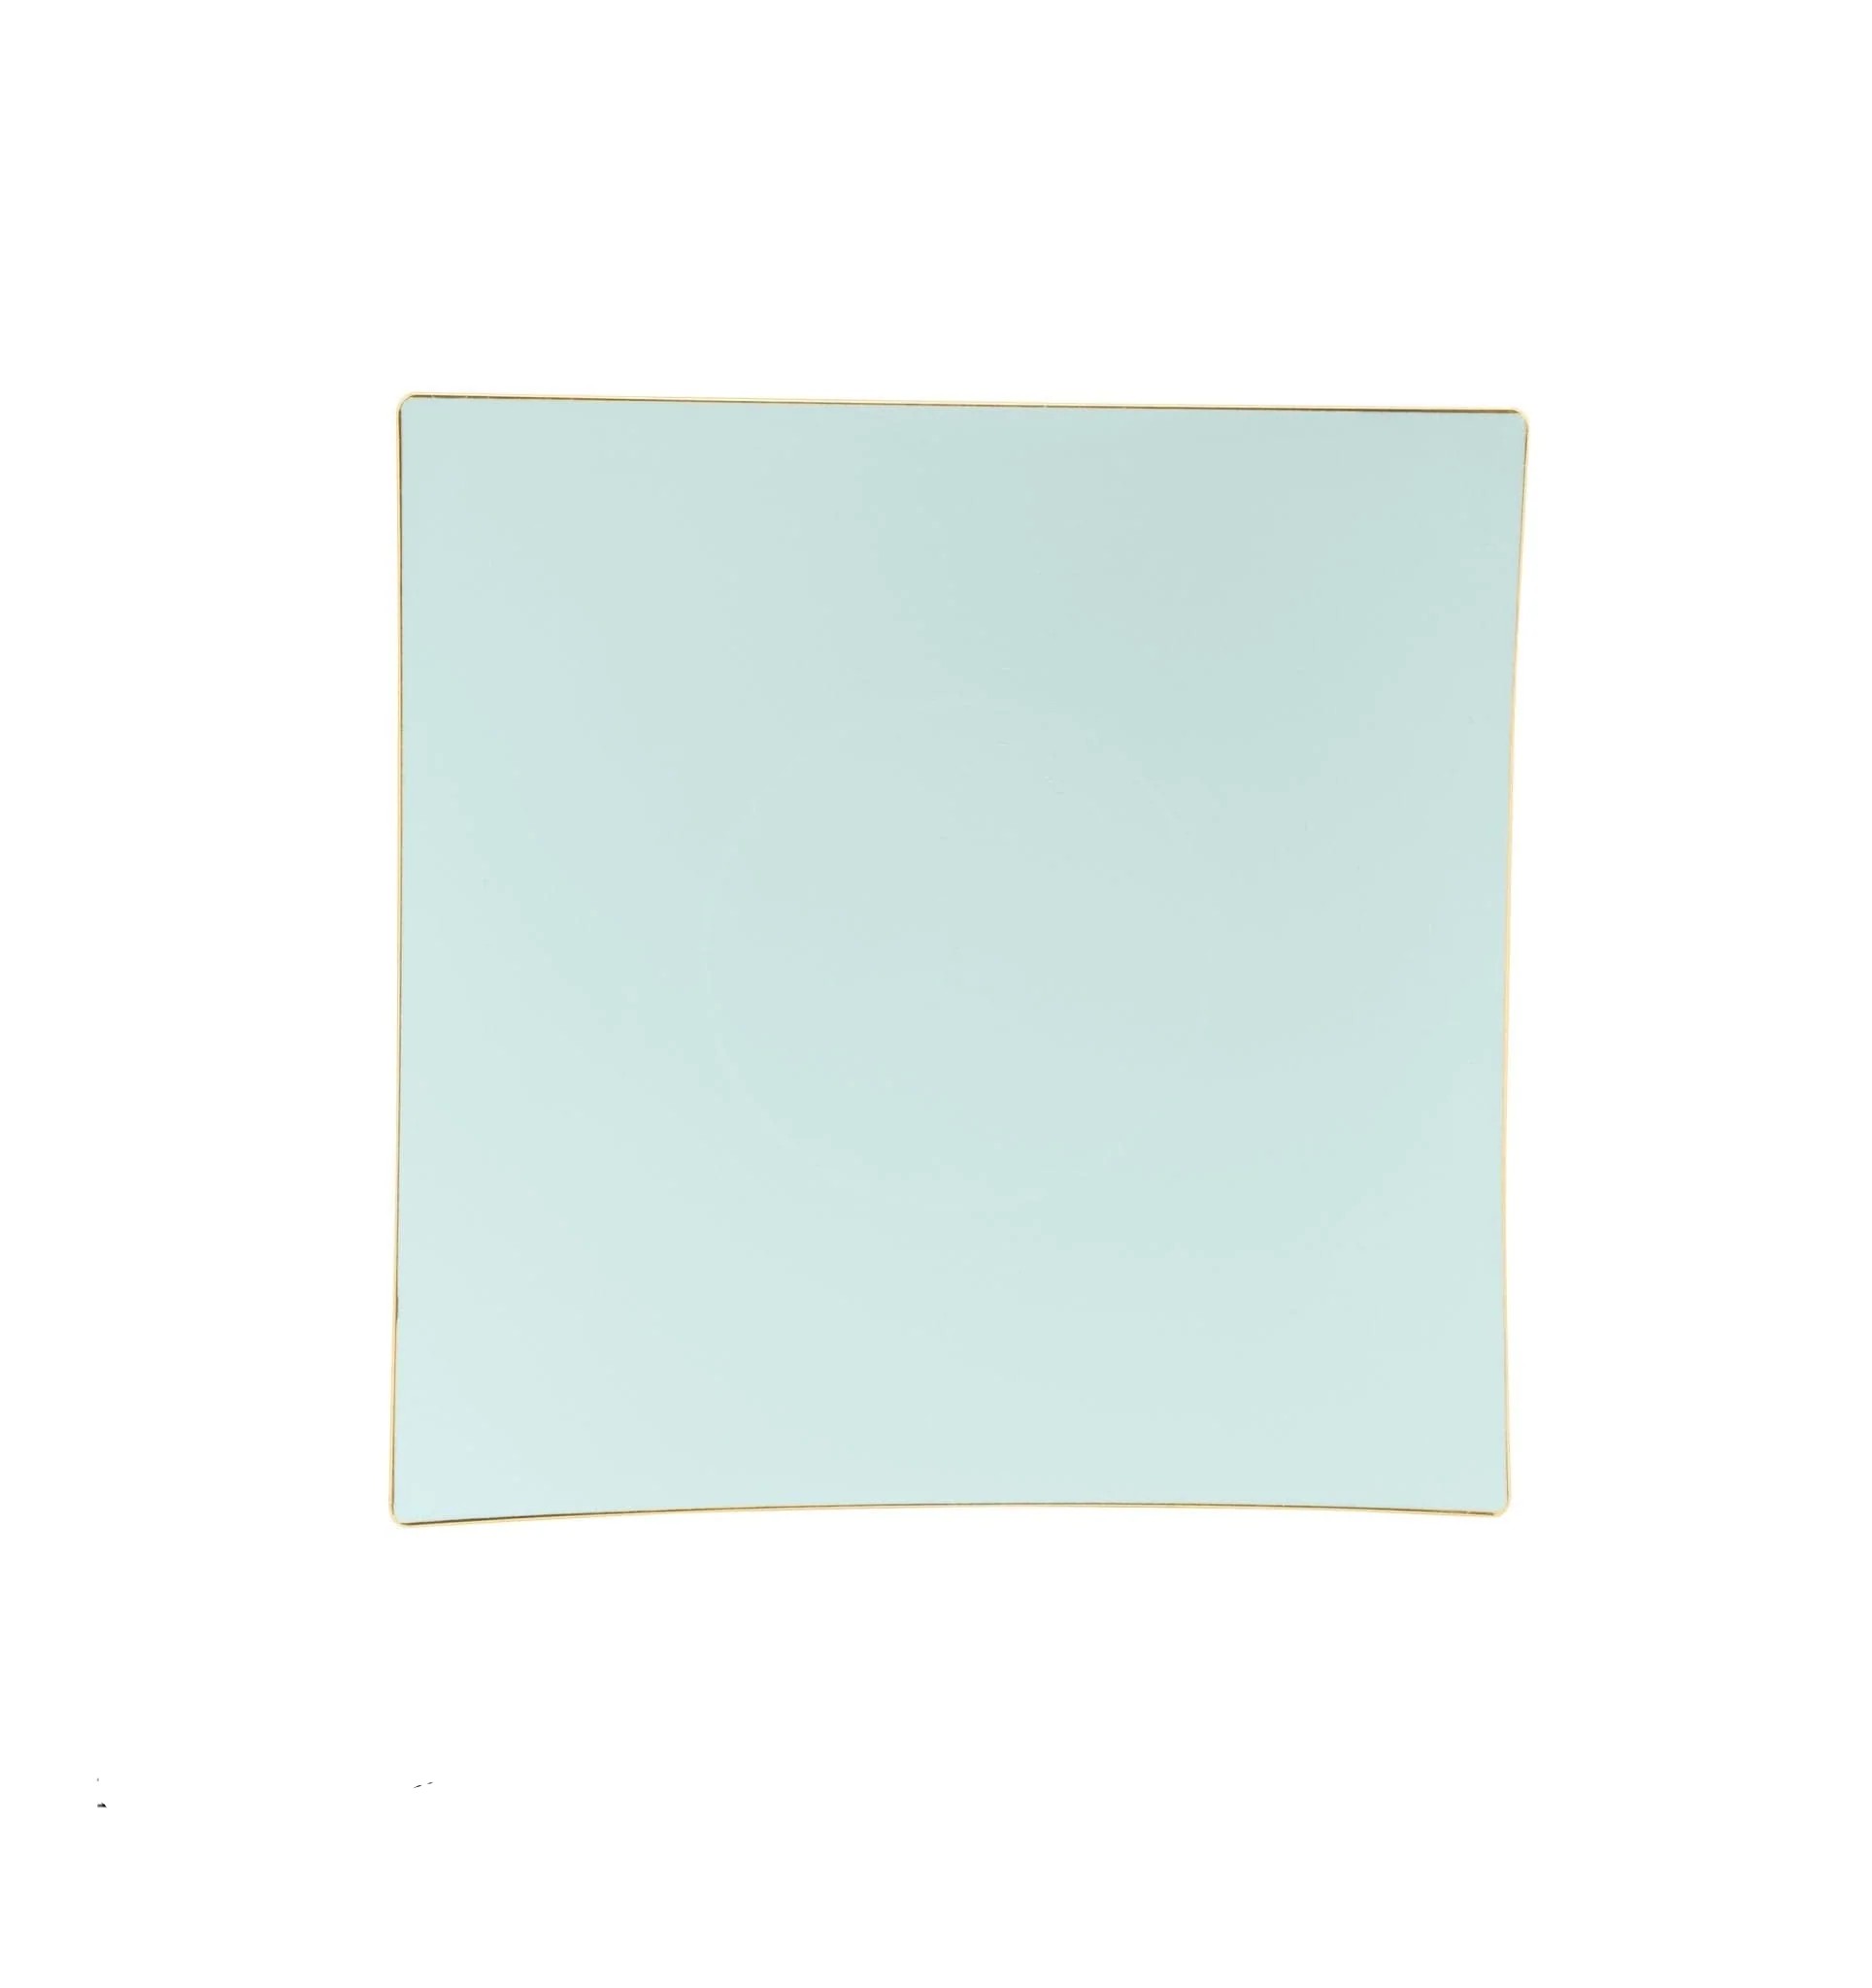 Luxe Party Square Mint with Gold Trim Plastic Dinner Plate 10.5